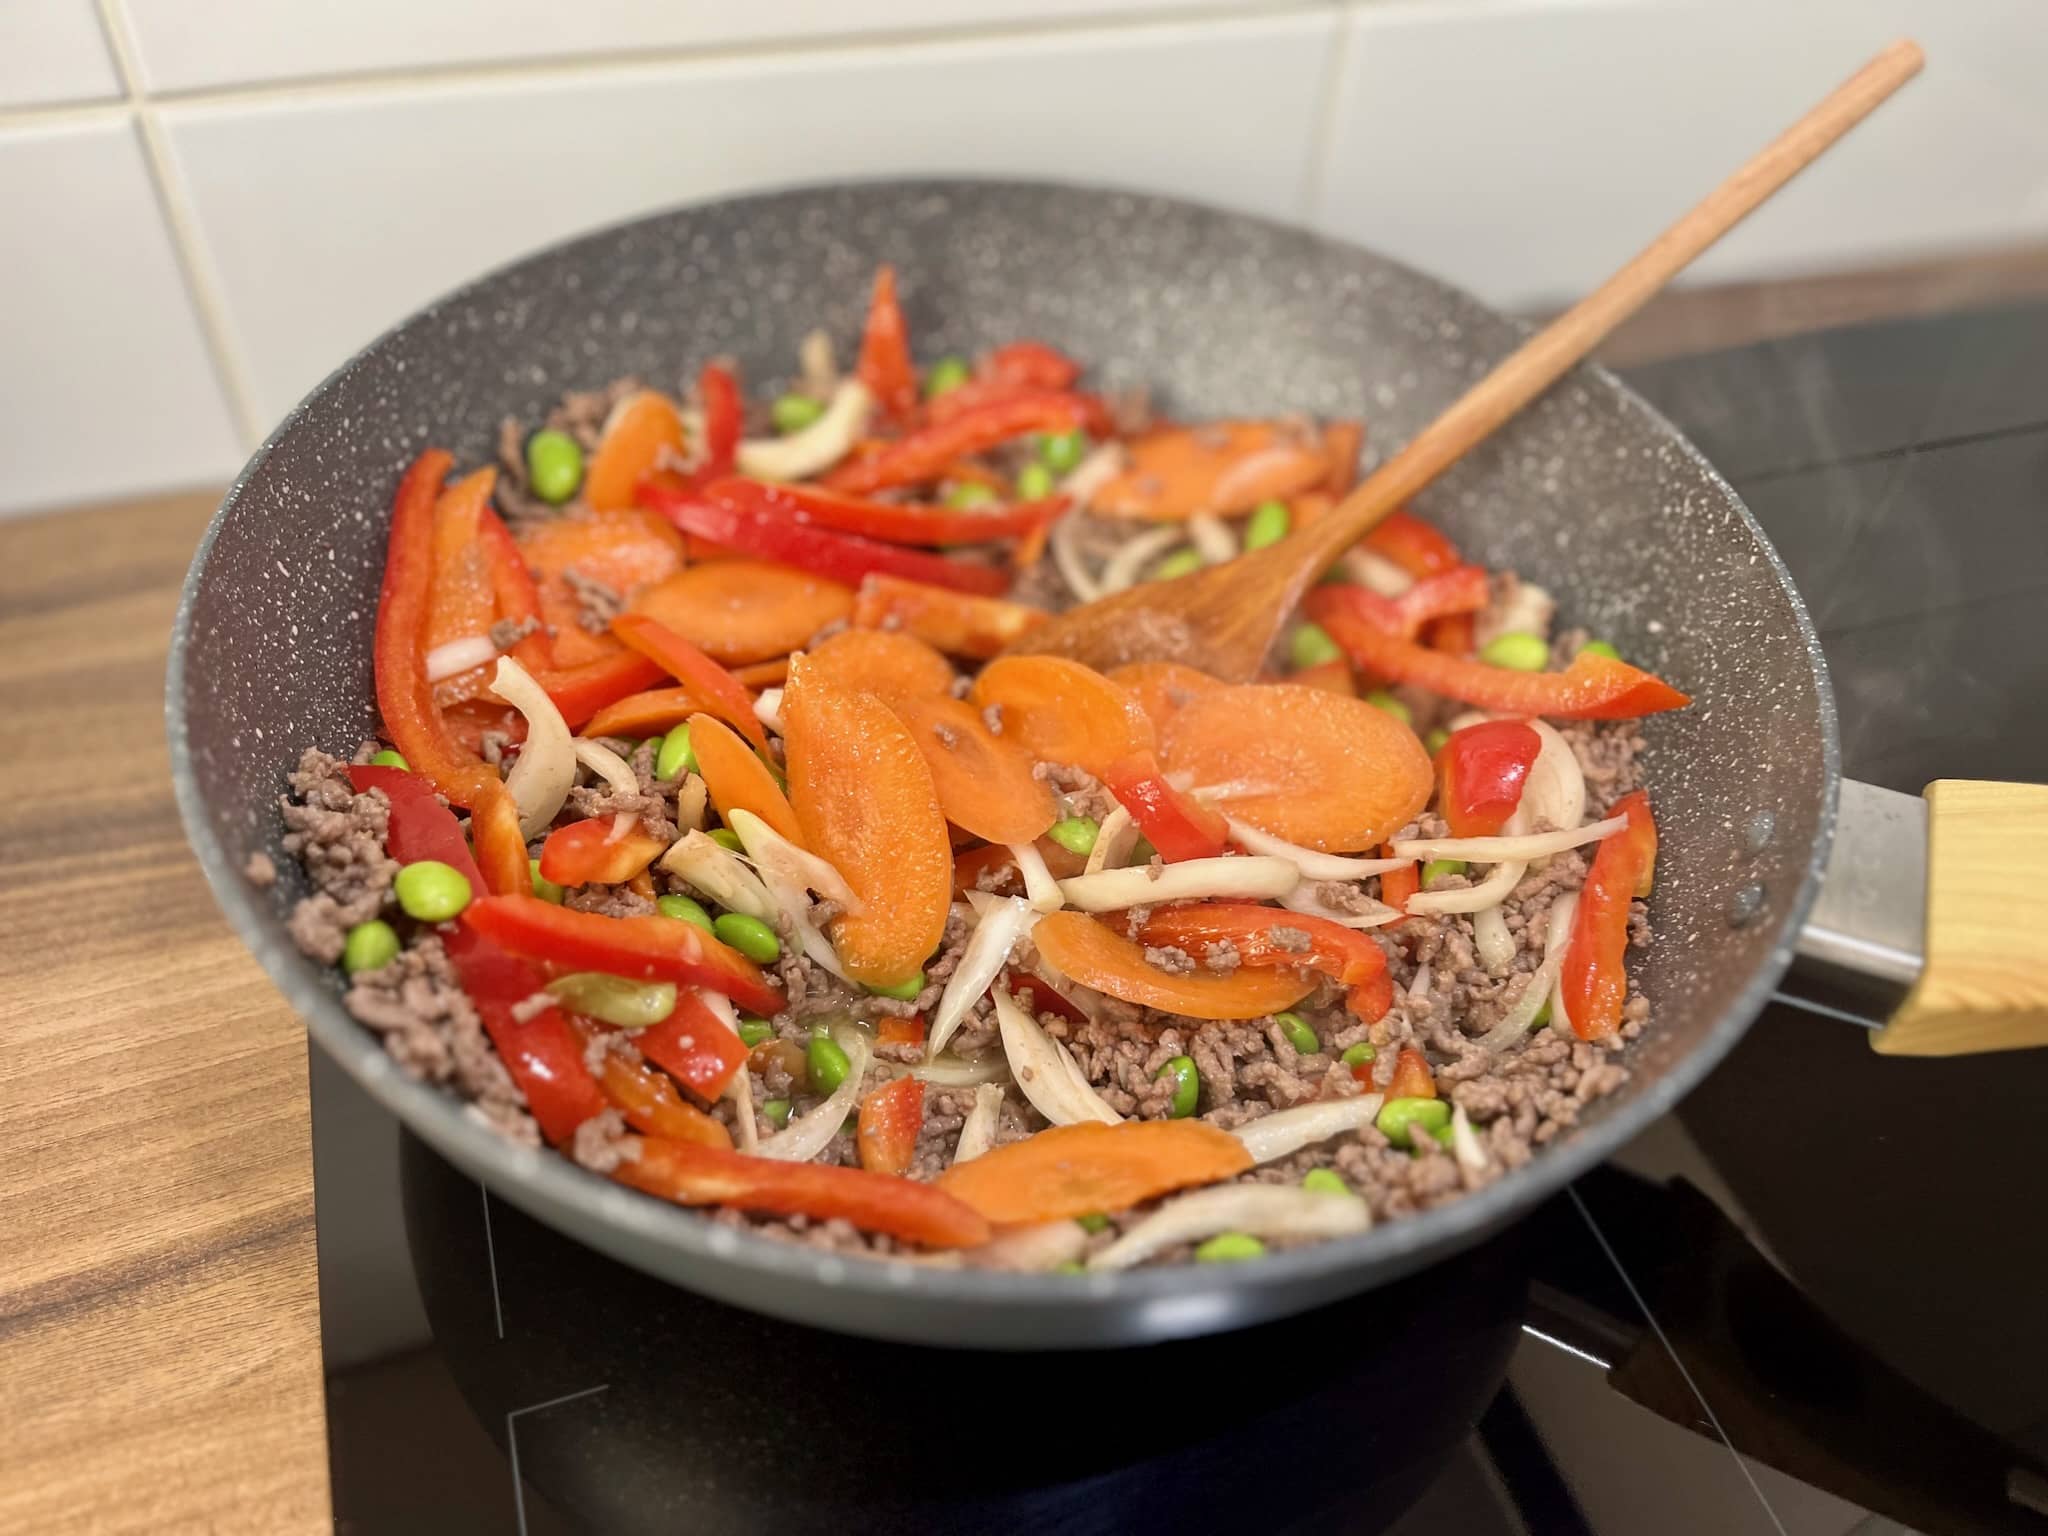 Well-stir-fried vegetables with ground beef in a pan